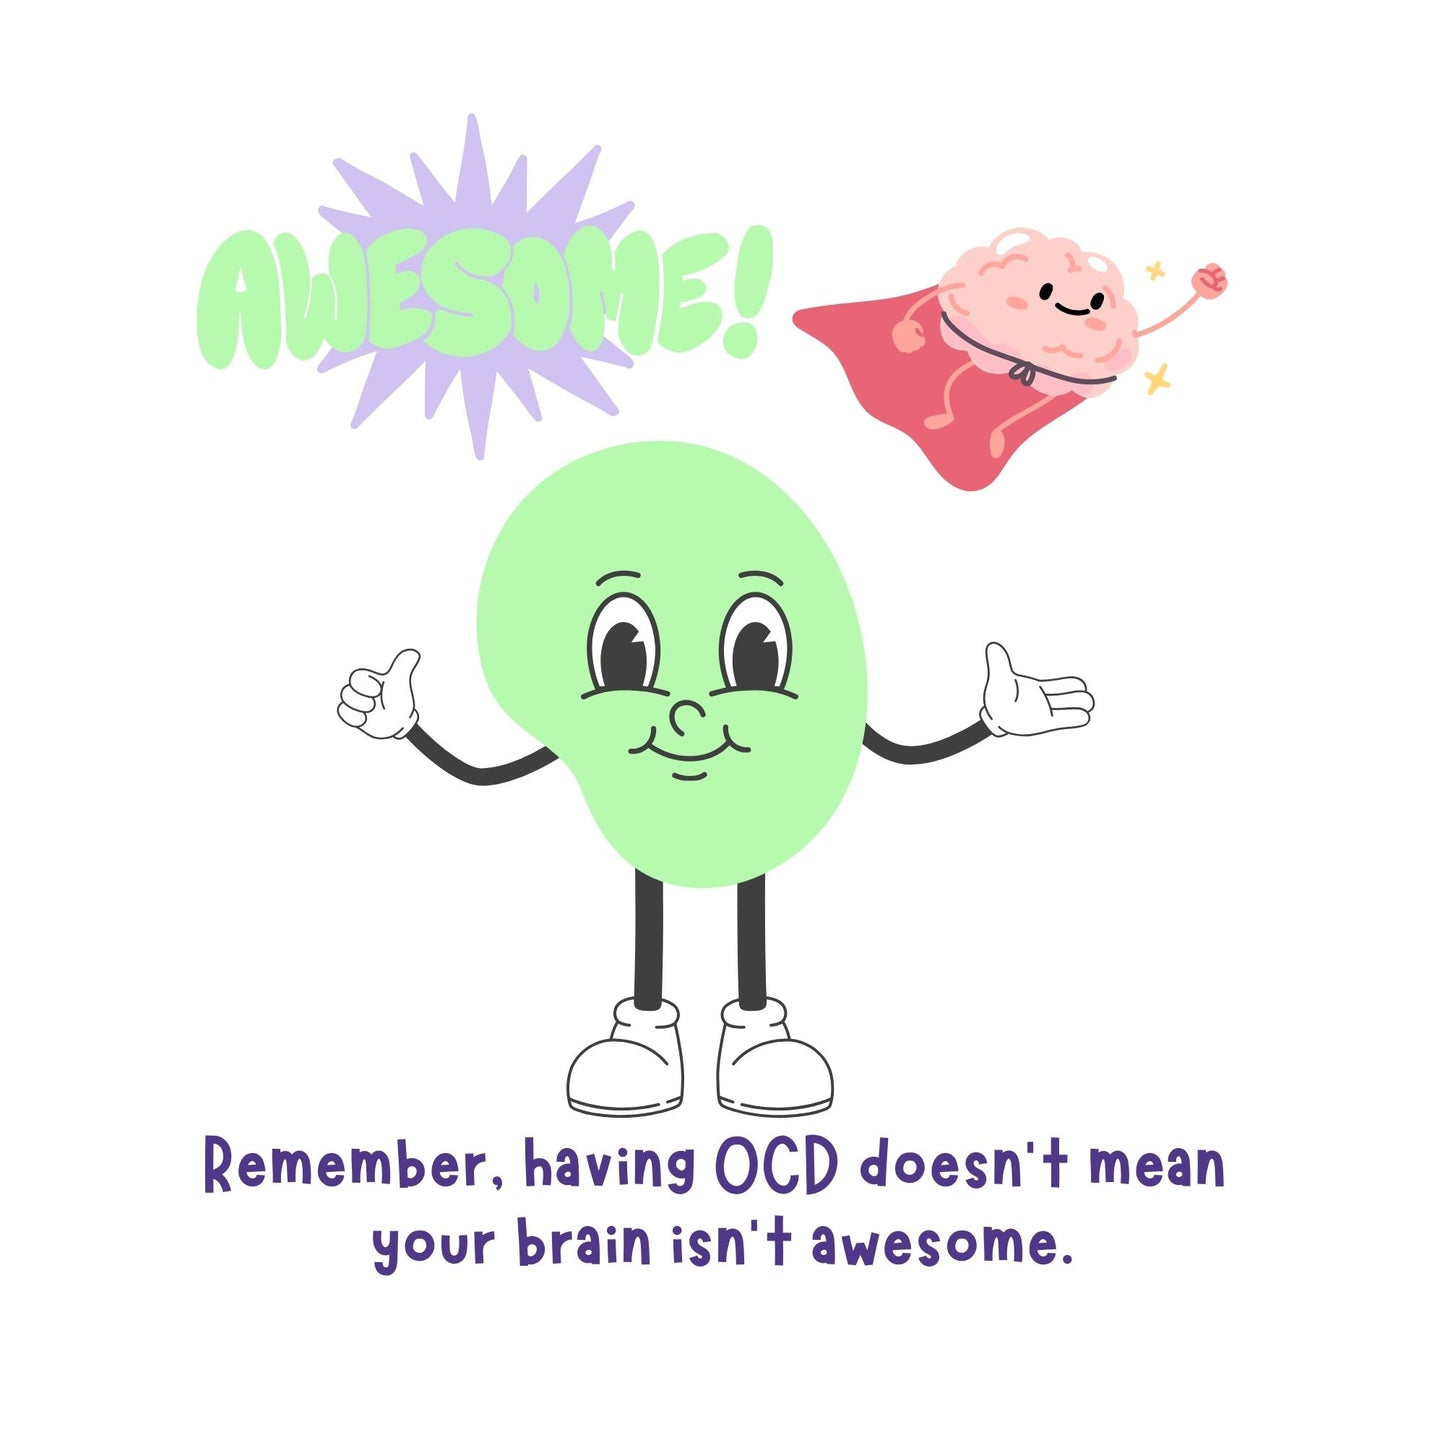 Your Beautiful Brain and OCD